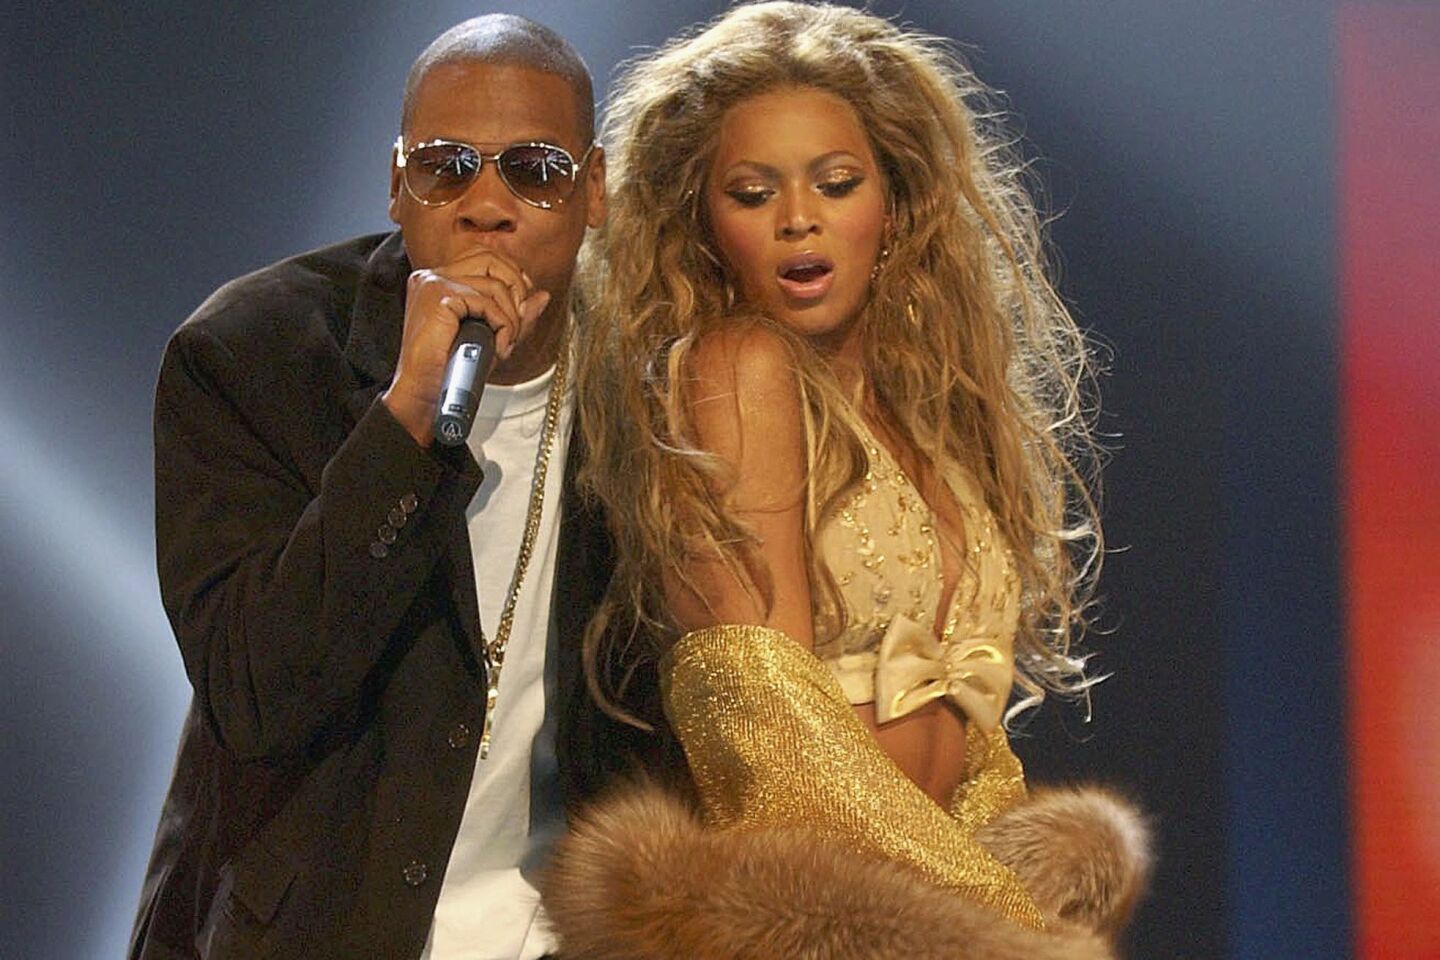 Beyonce and Jay-Z - 2003